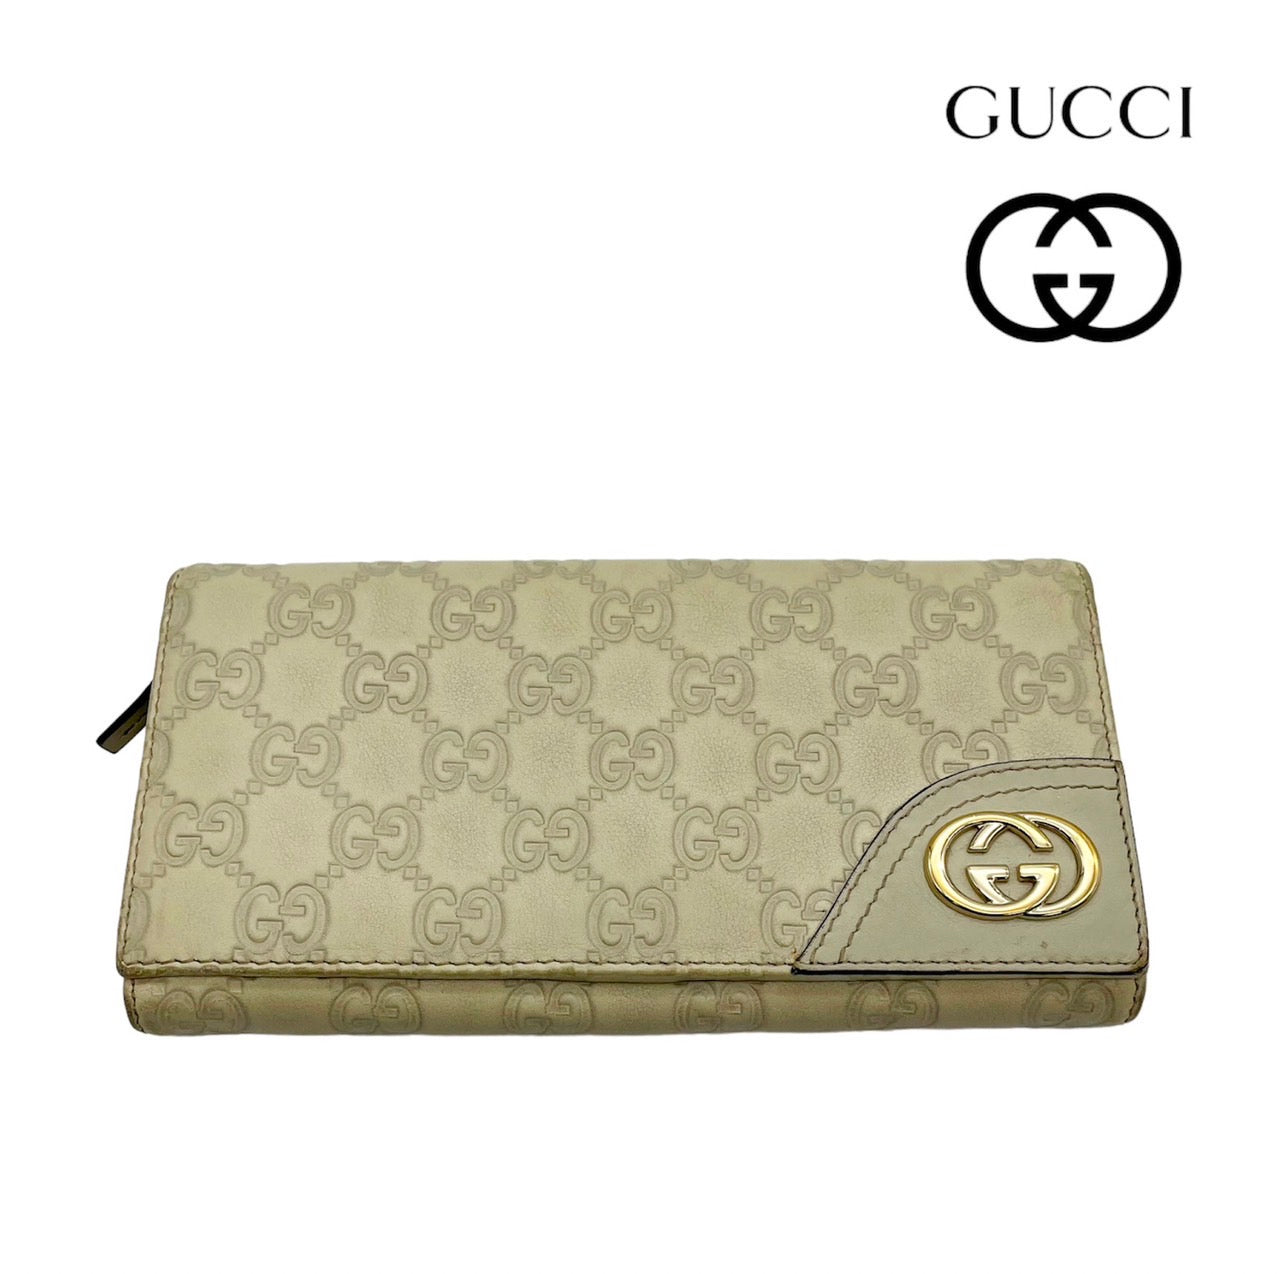 GUCCI Guccishima leather long wallet 